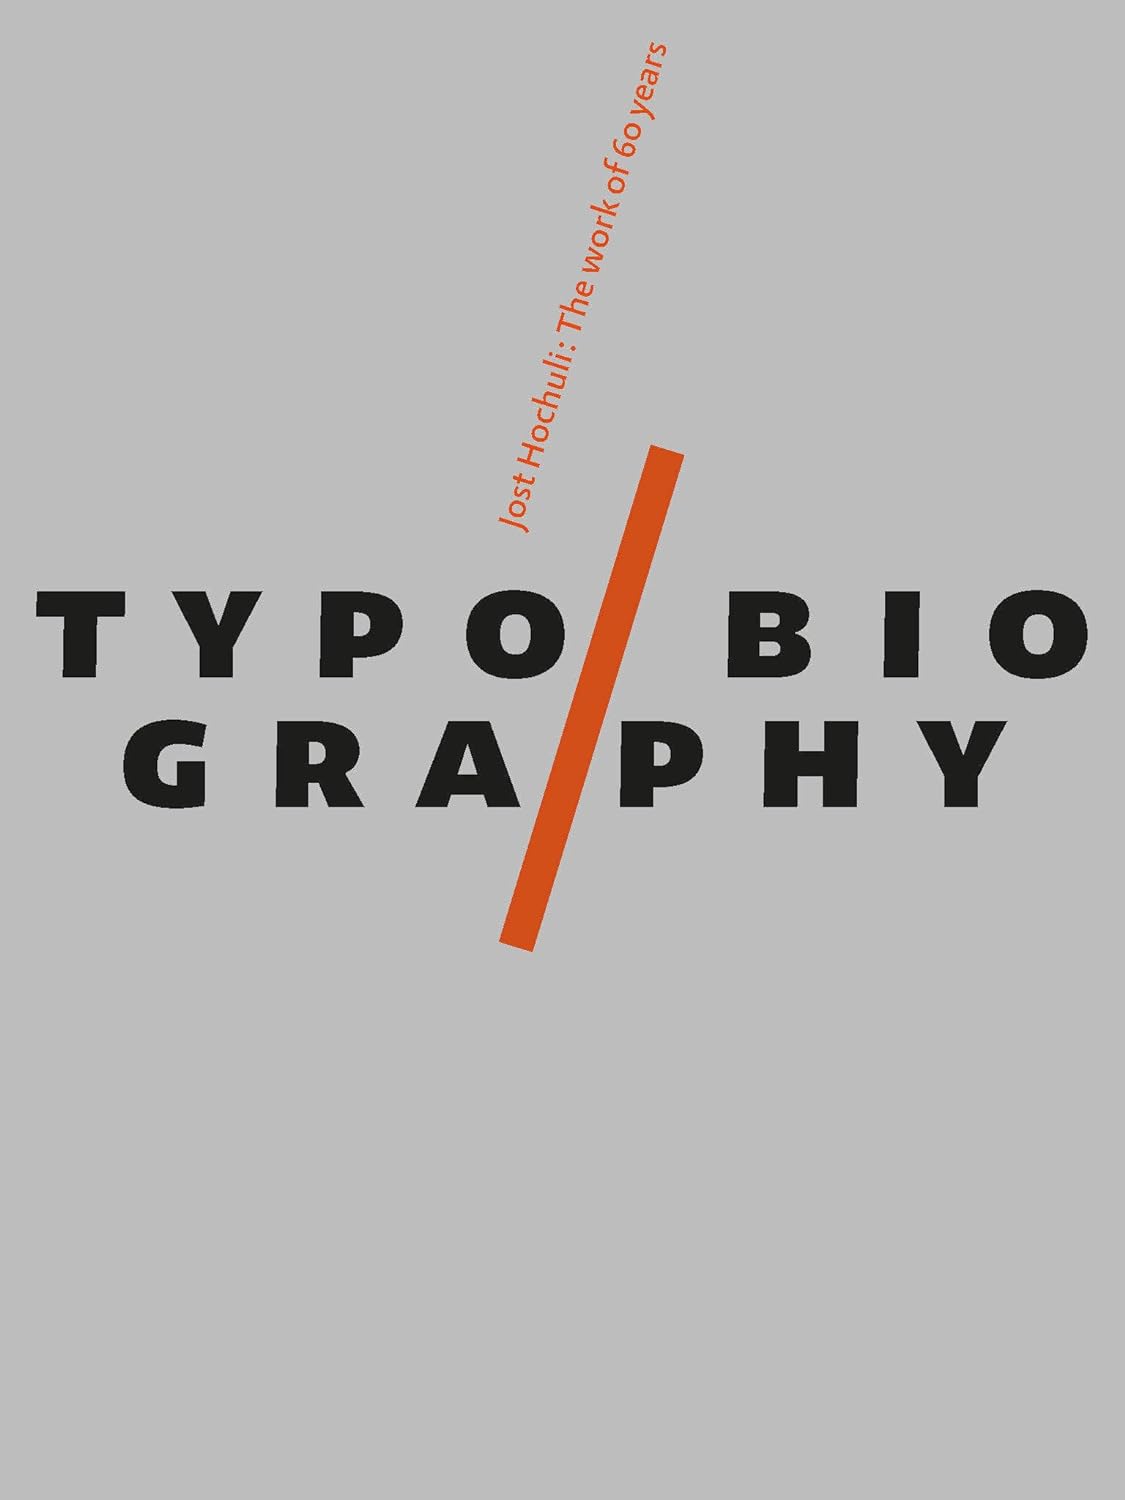 TYPOBIOGRAPHY. JOST HOCHULI, THE WORK OF 60 YEARS